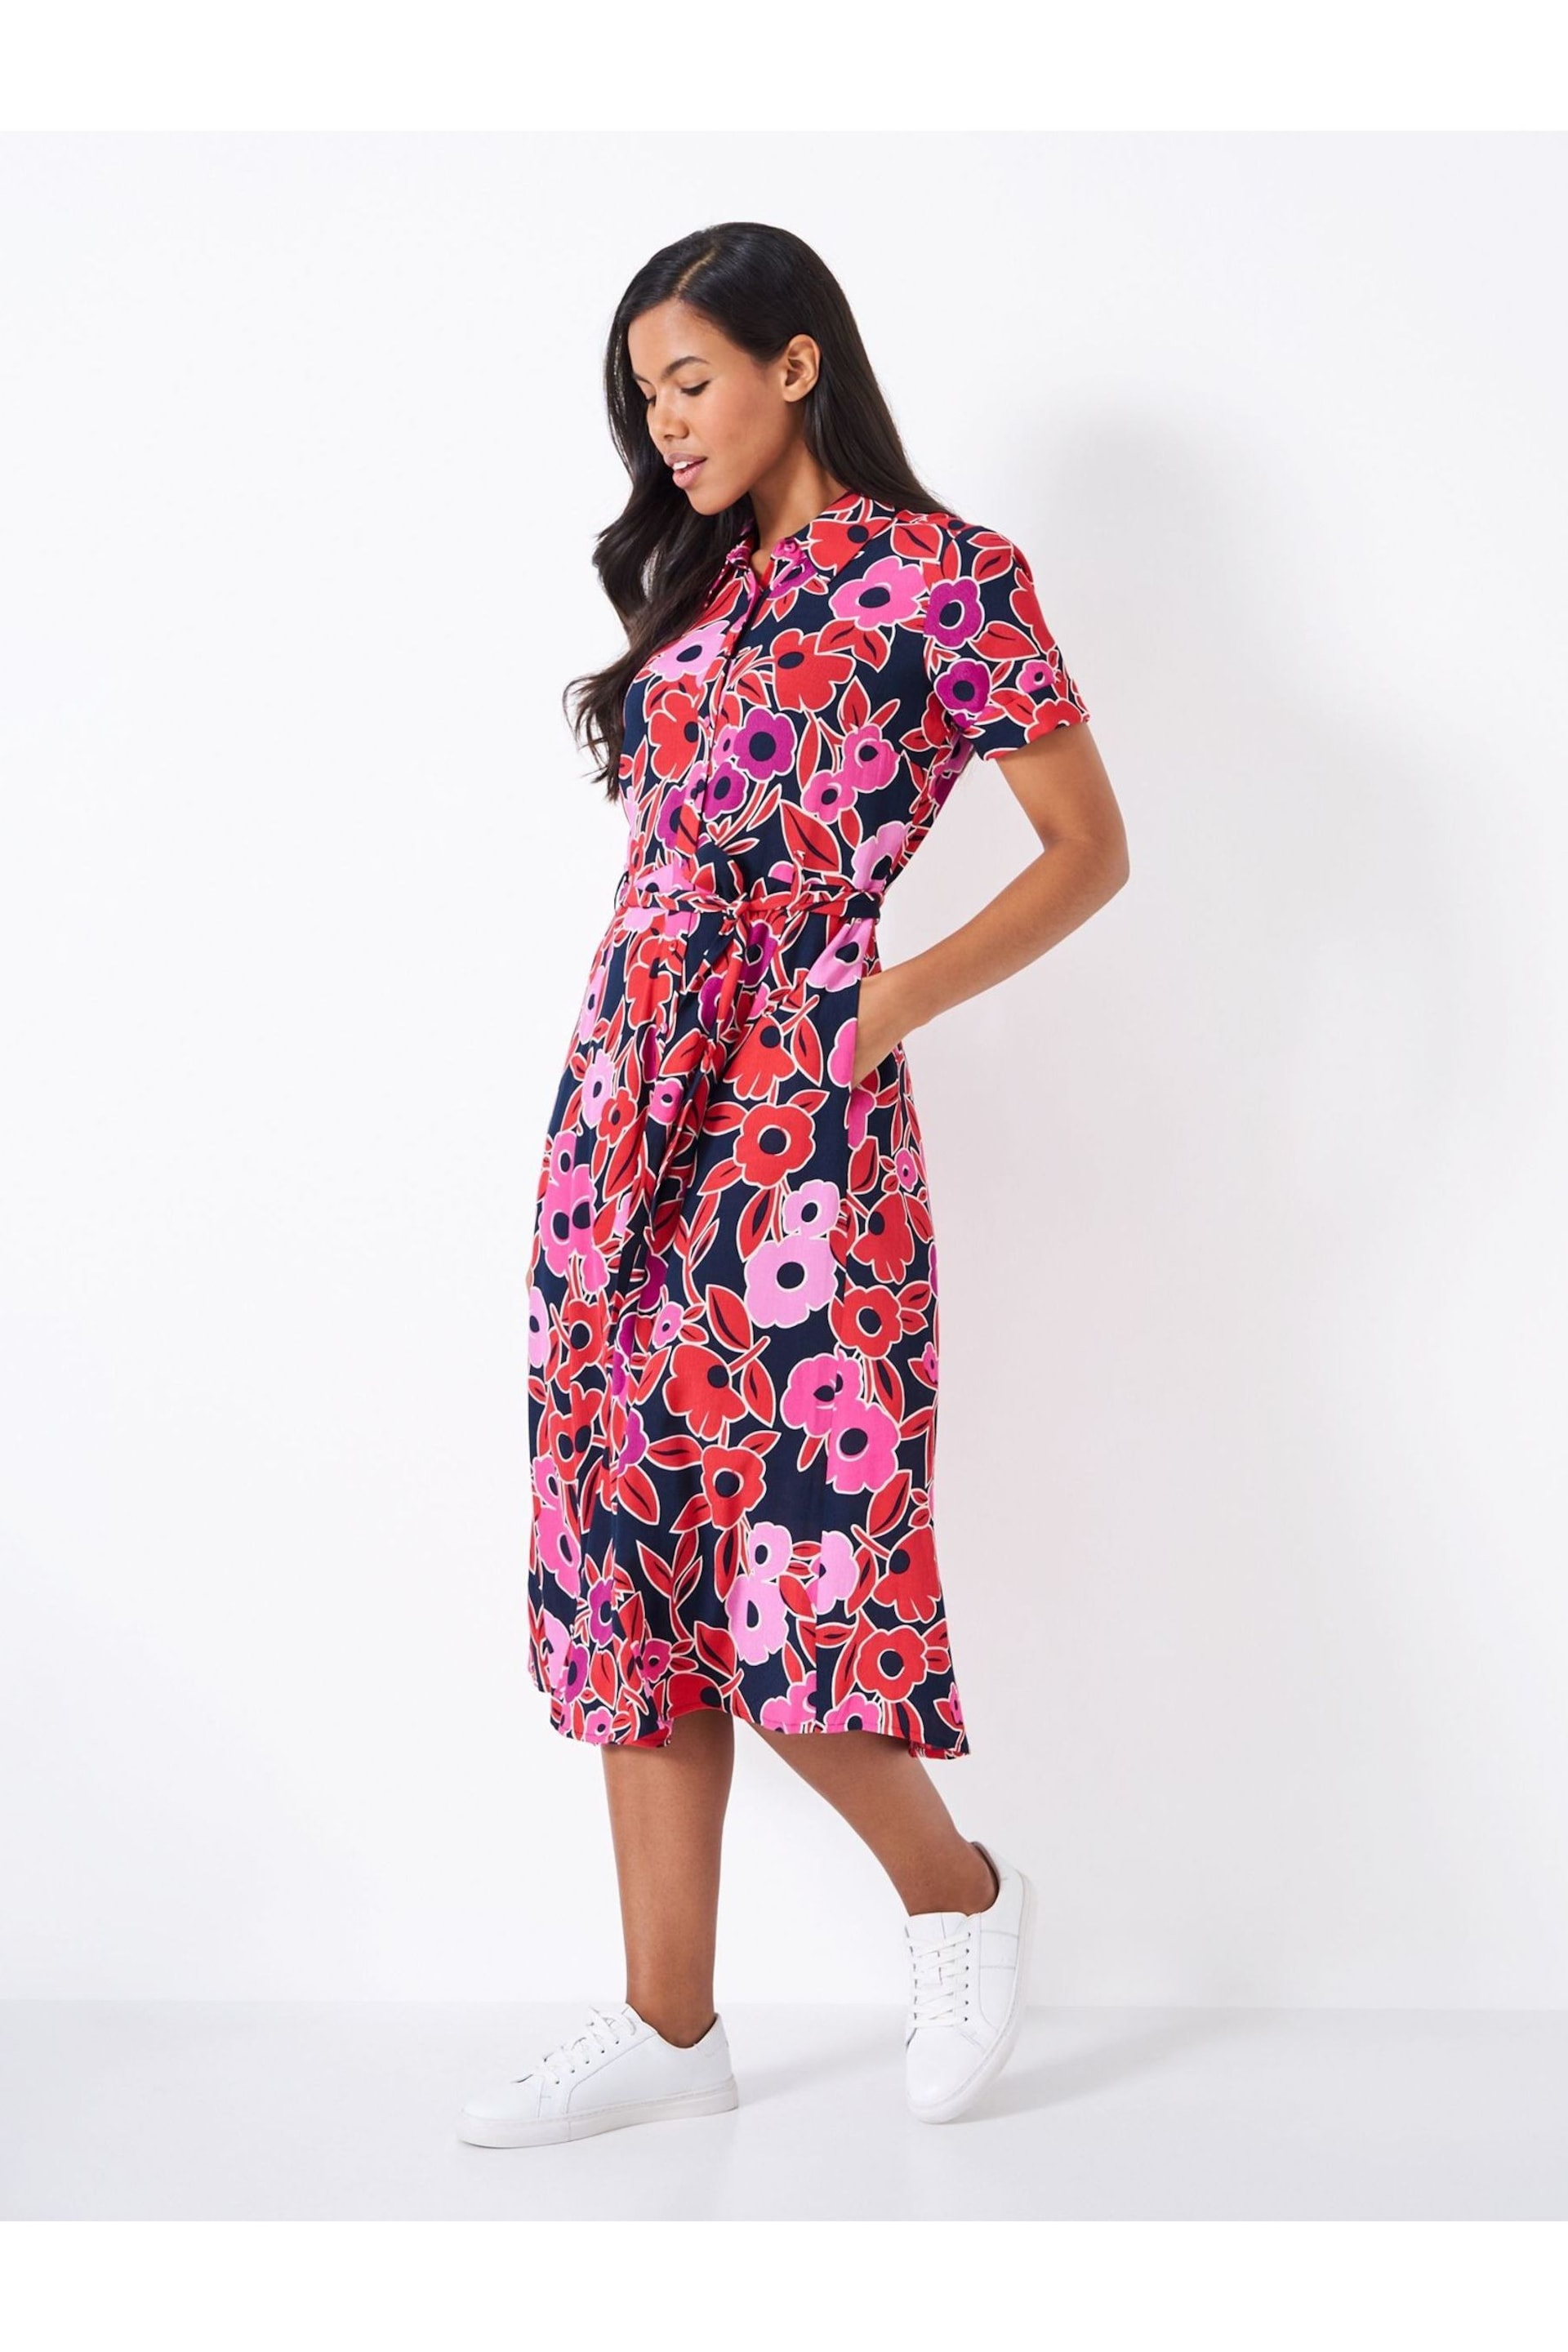 Crew Clothing Sienna Short Sleeve Floral Shirt Dress - Image 1 of 5